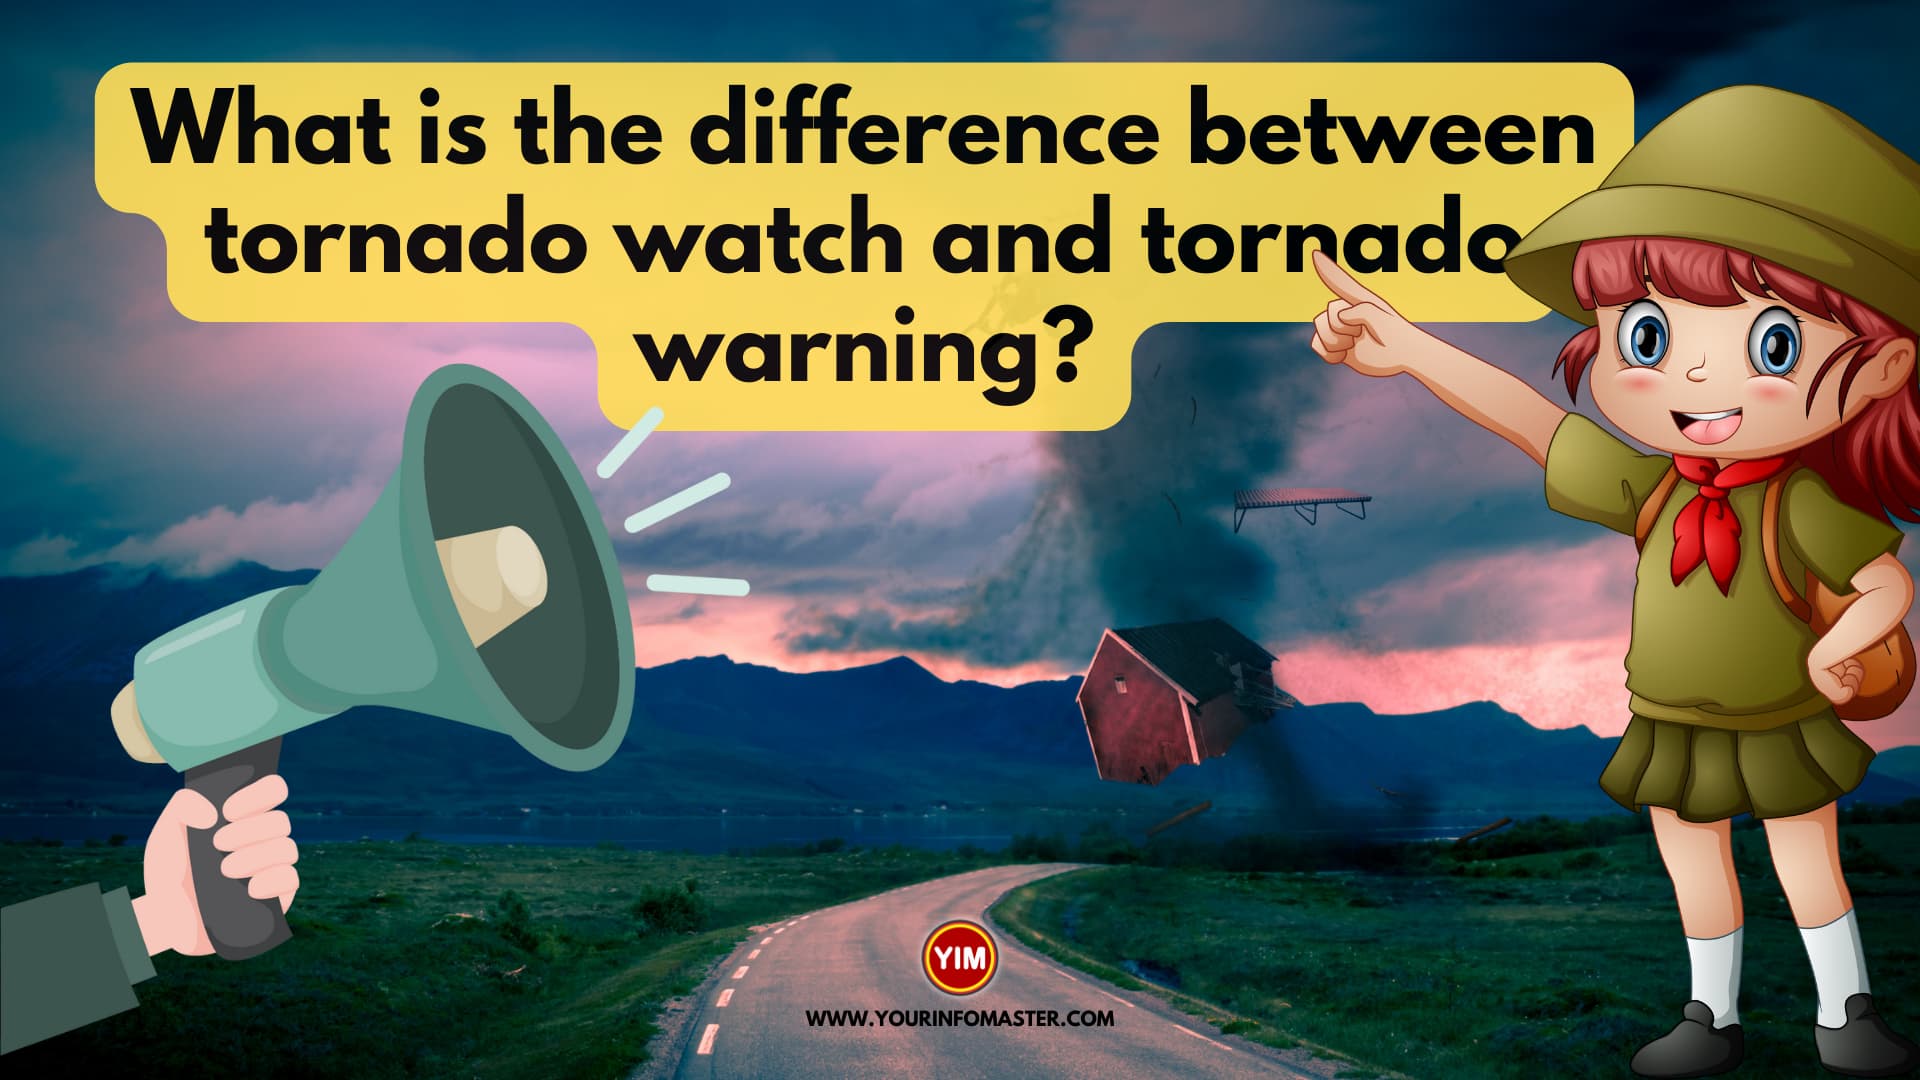 What is the difference between tornado watch and tornado warning